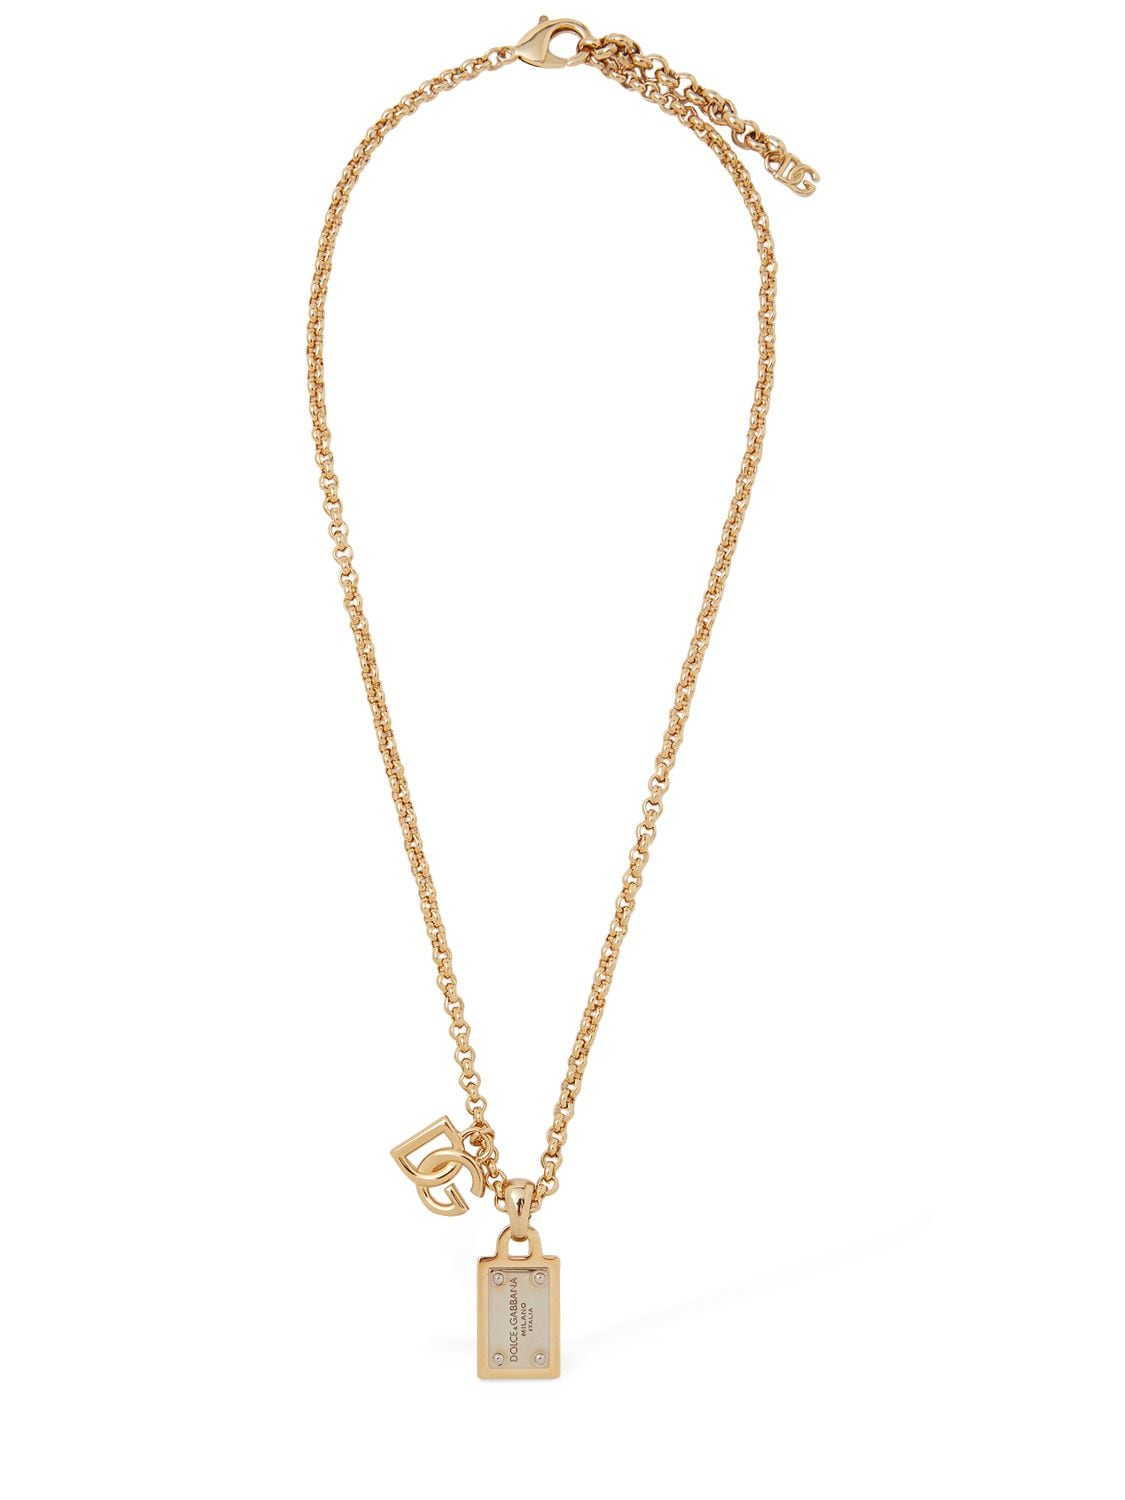 Dolce & Gabbana Dg Plaque Charm Necklace In Gold,silver